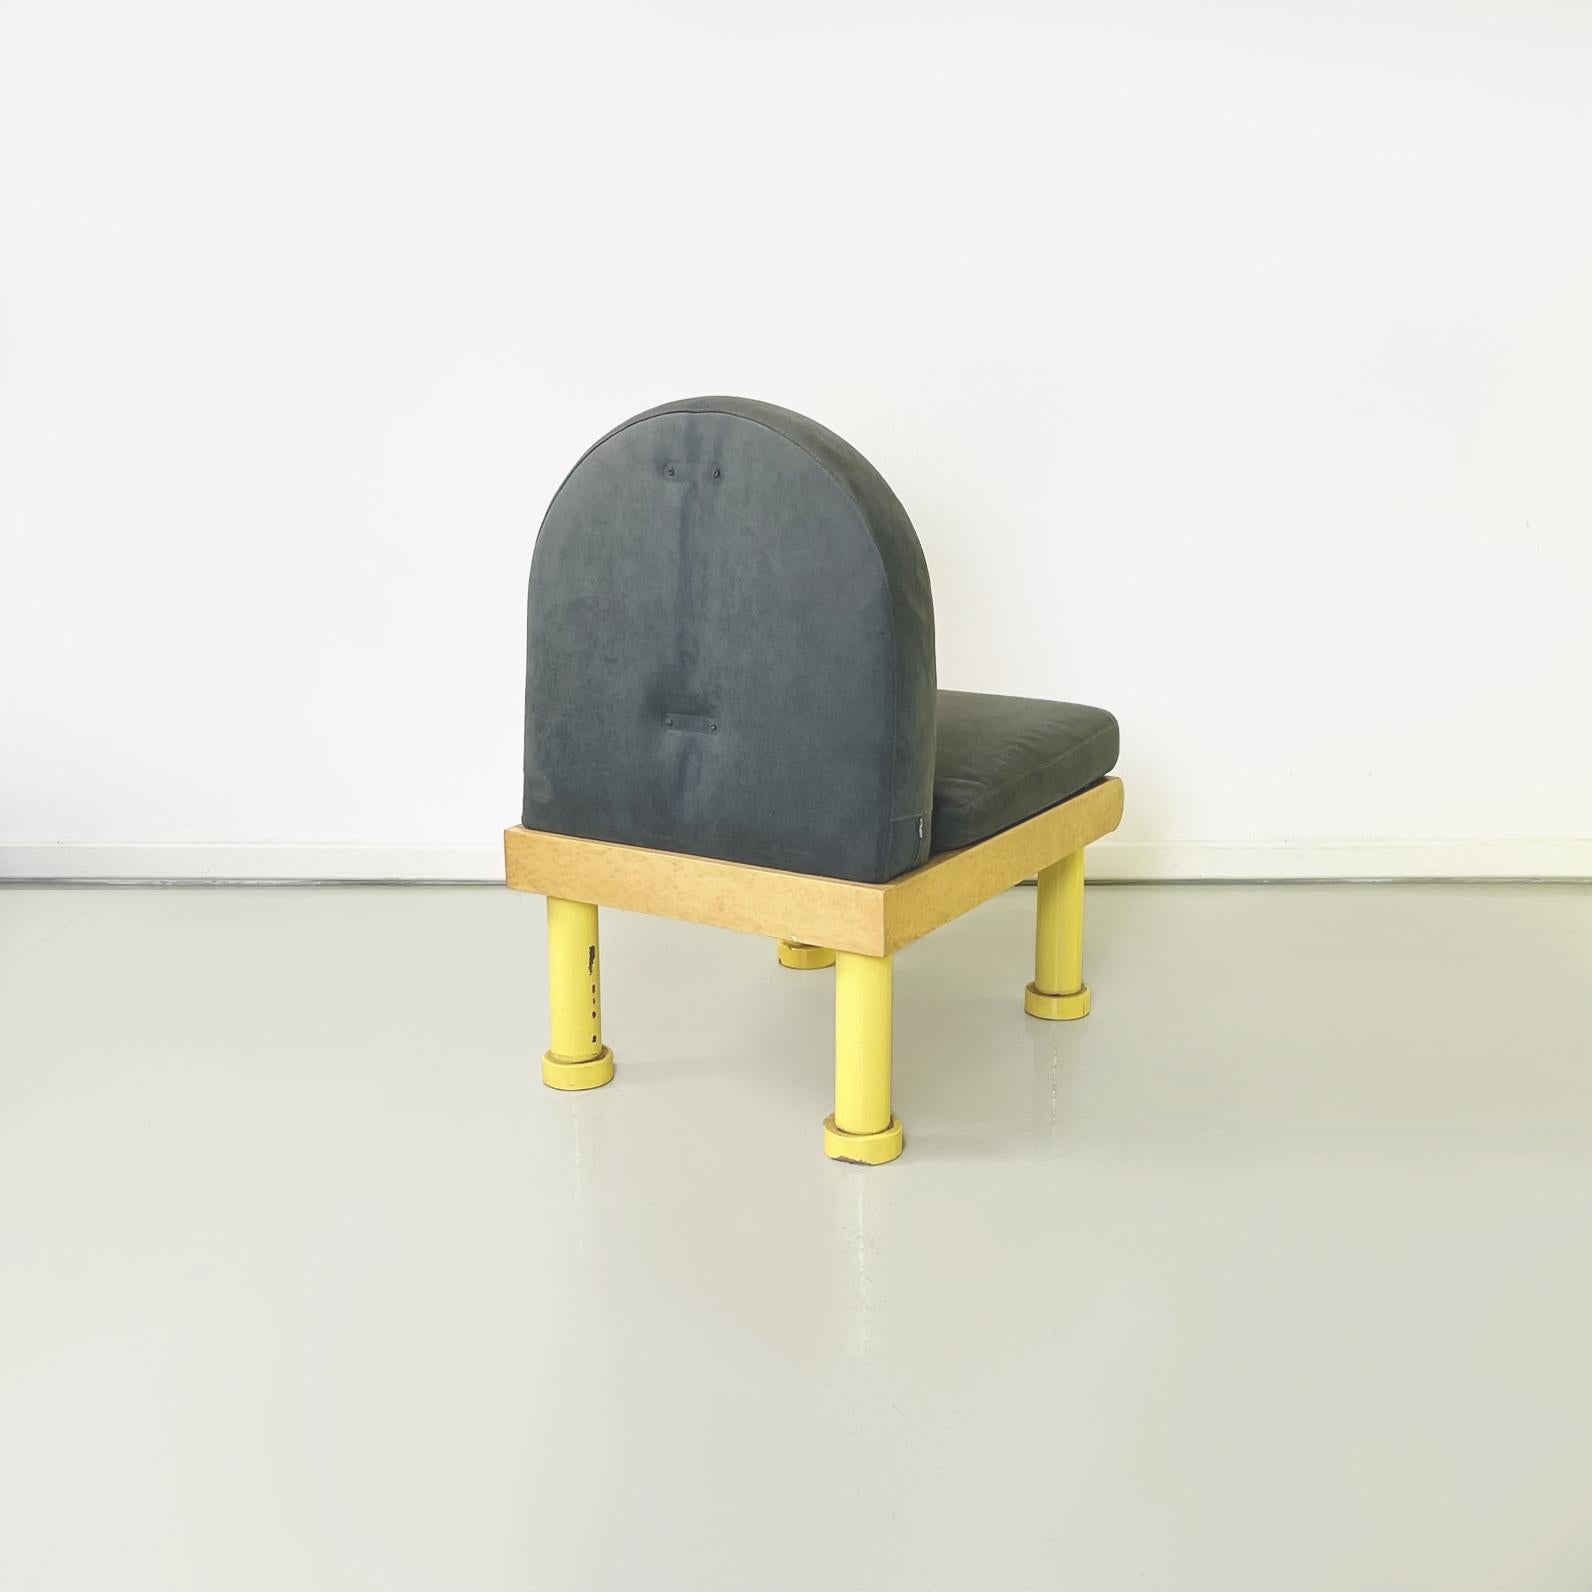 Late 20th Century Italian Modern Chair in Gray Velvet, Briar Wood and Yellow Metal, 1980s For Sale